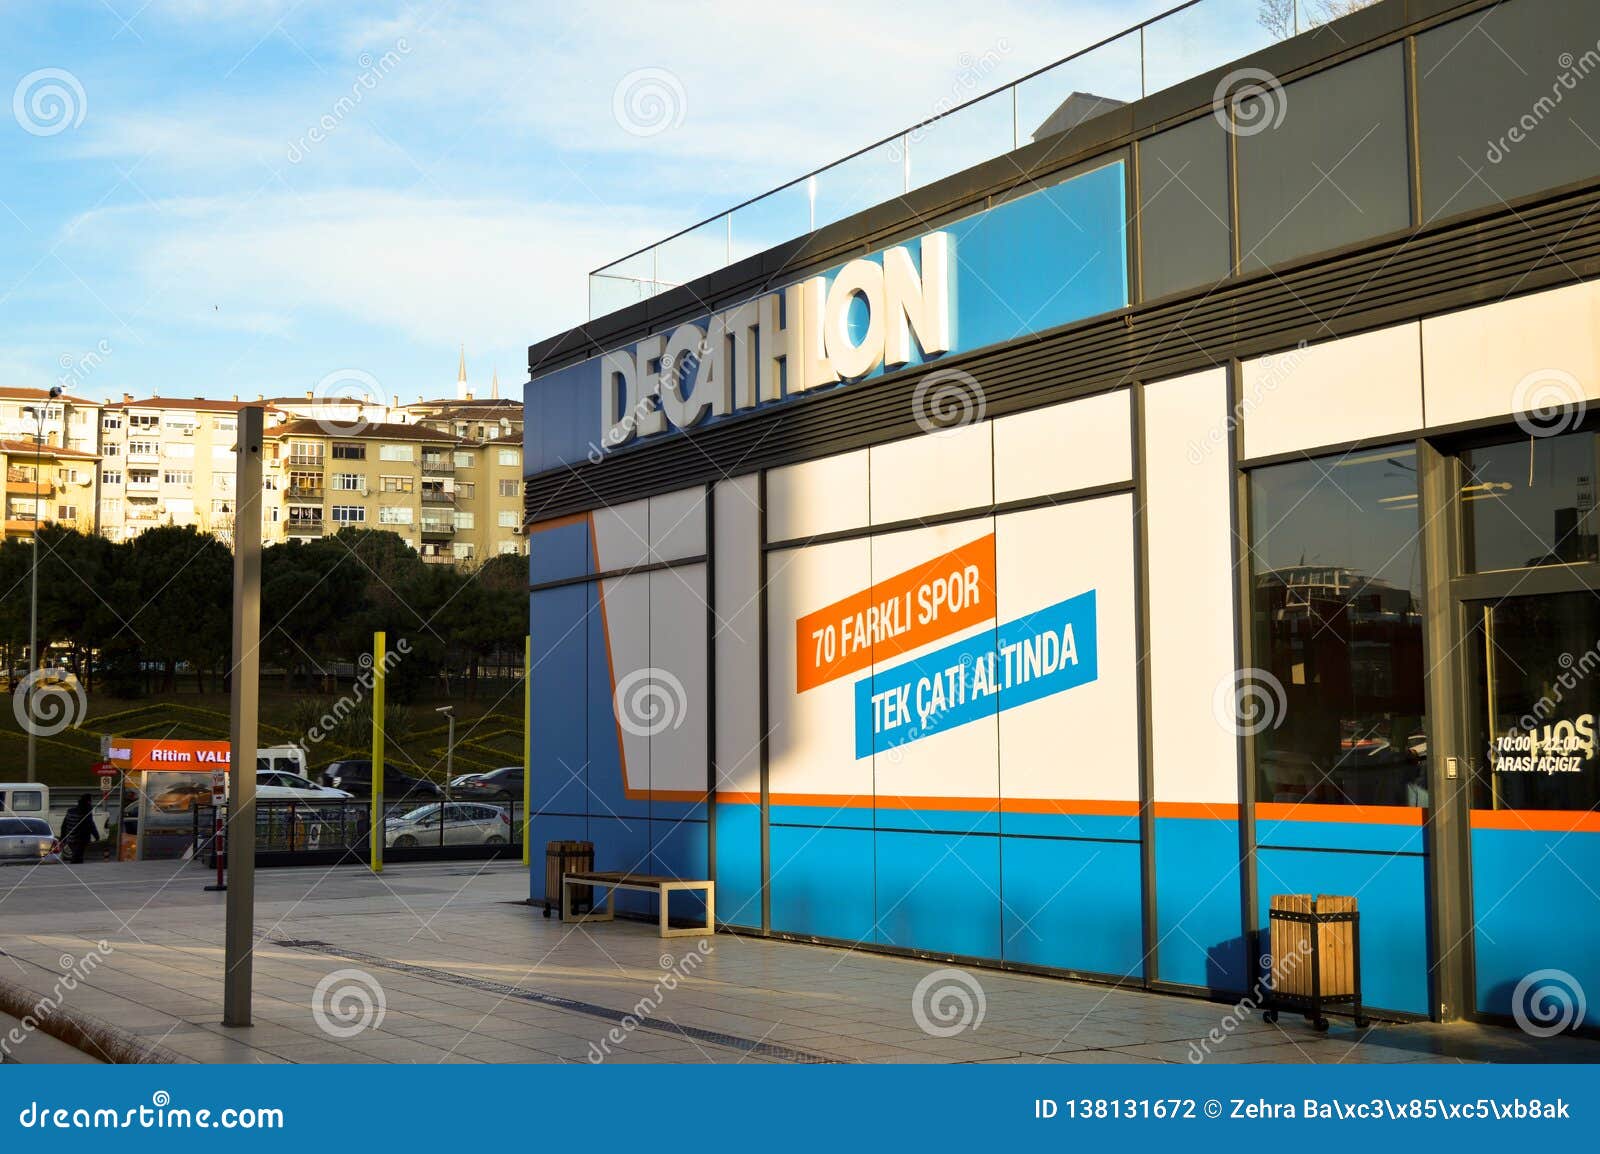 decathlon store sells materials related to 70 different sports istanbul maltepe store entrance editorial photography image of maltepe january 138131672